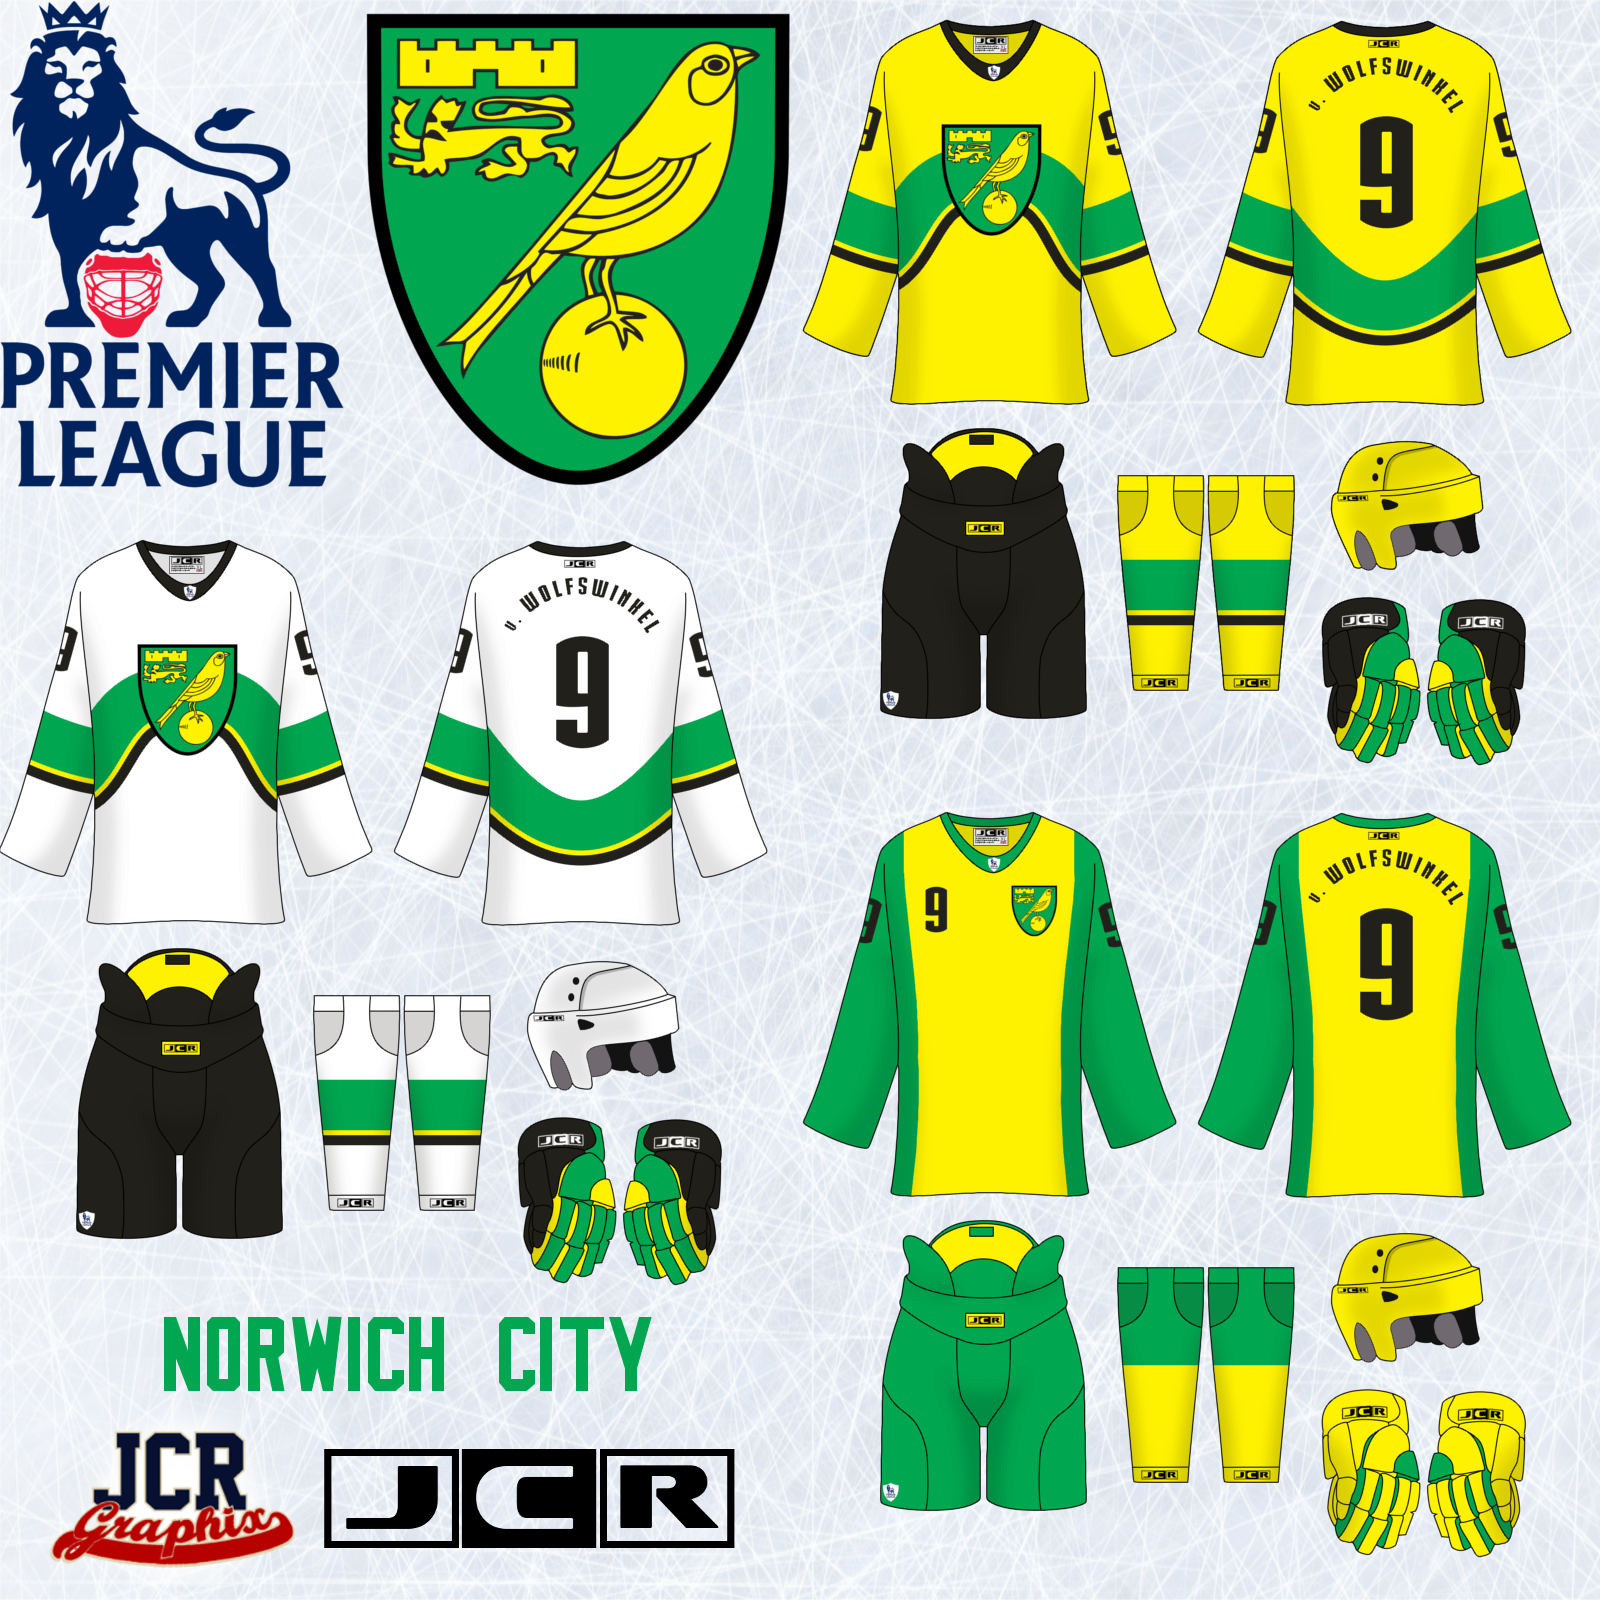 norwichcity.png